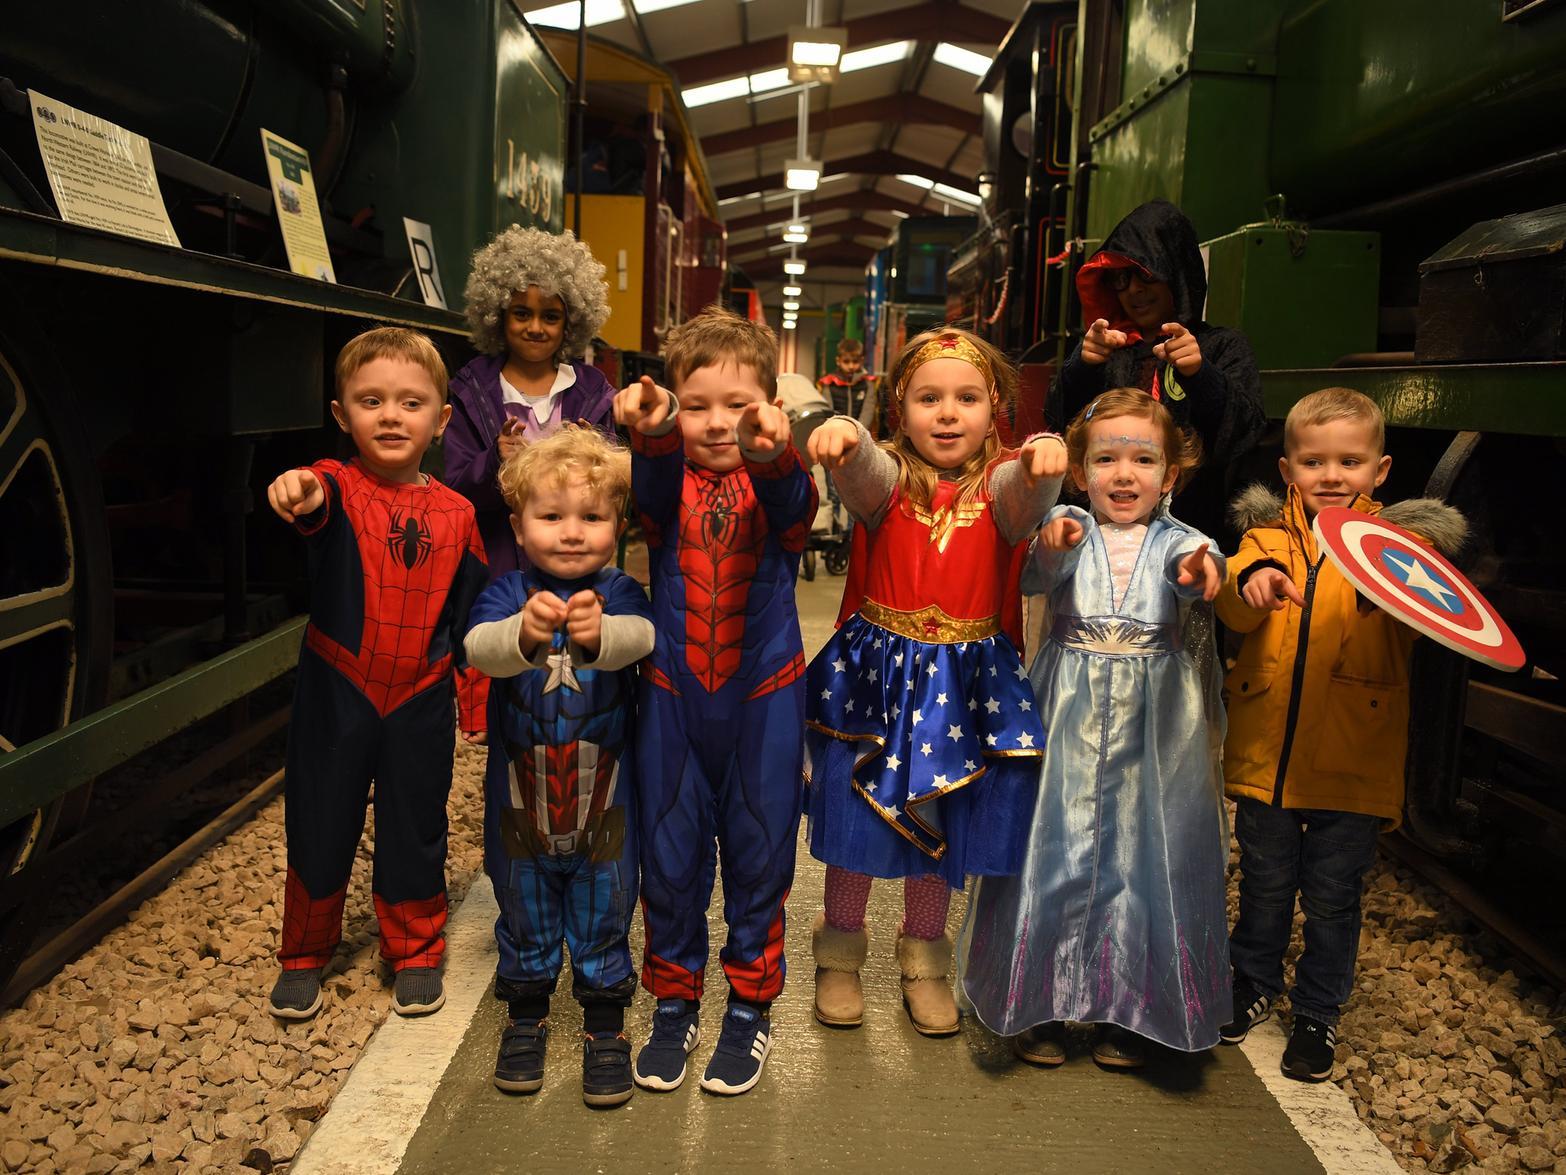 Superhero day at Ribble Steam Railway and Museum.